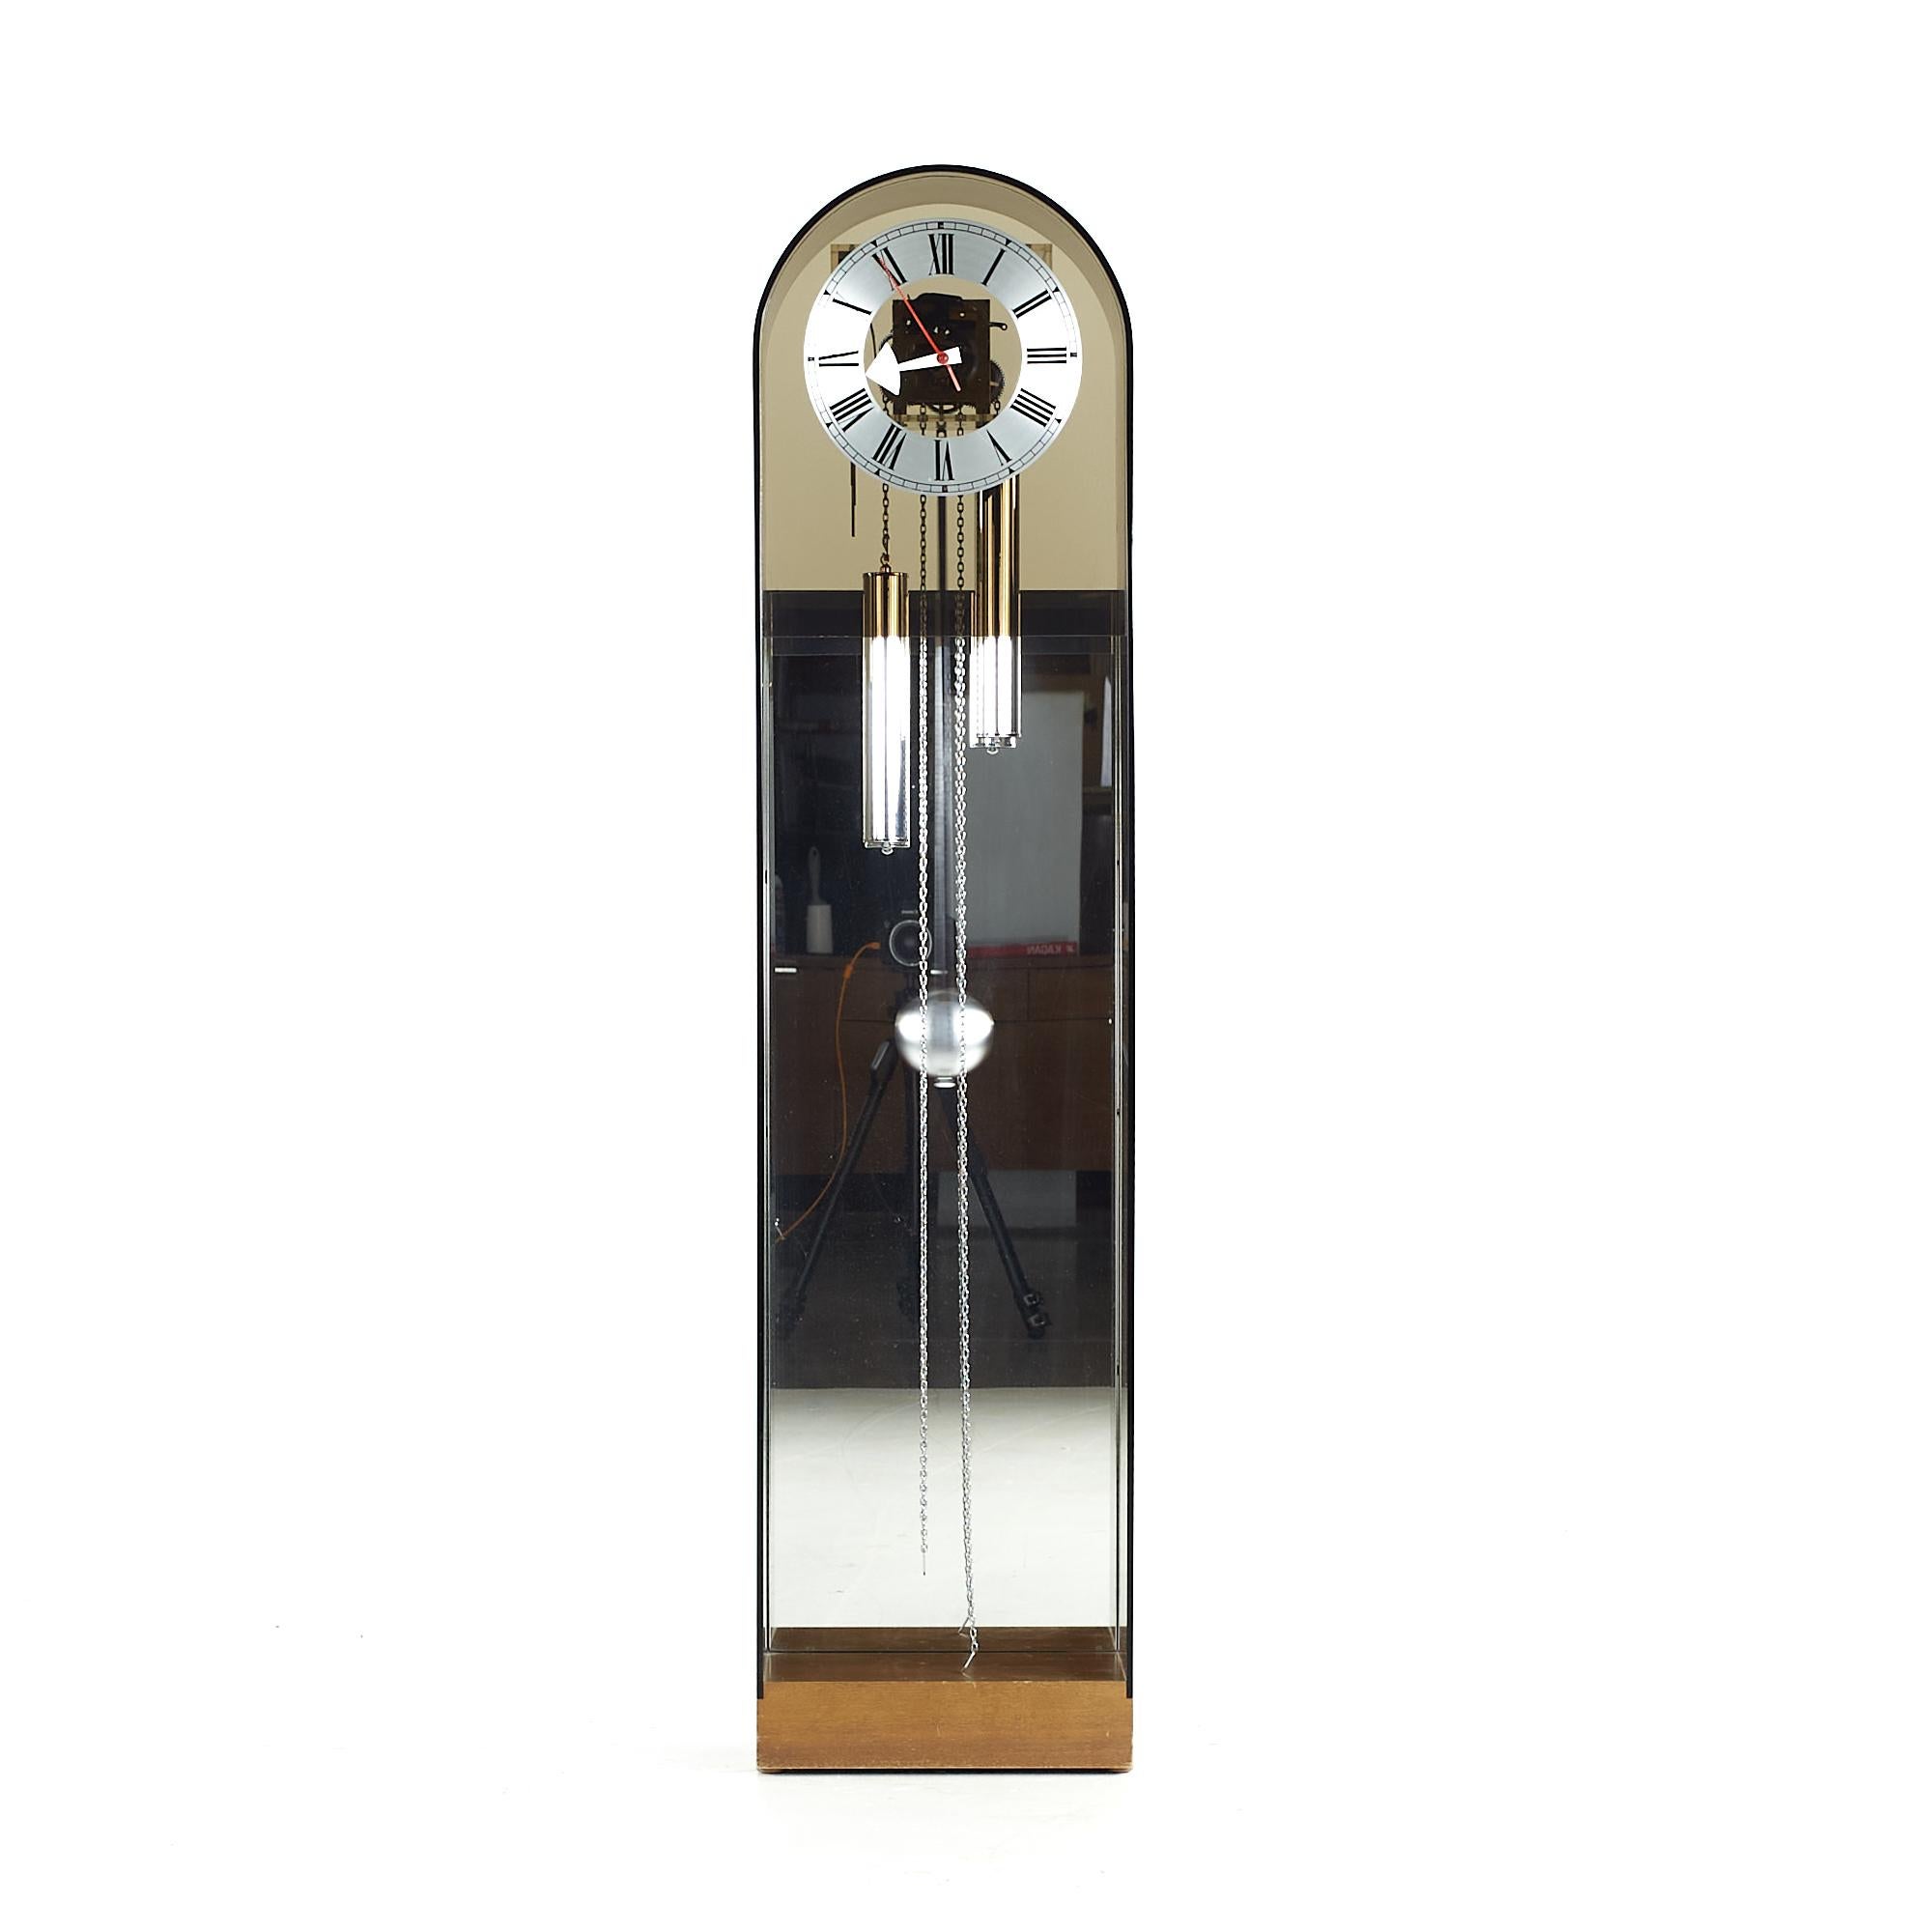 George Nelson for Howard Miller Mid Century lucite Grandfather Clock

This clock measures: 13 wide x 9 deep x 55.25 inches high

We take our photos in a controlled lighting studio to show as much detail as possible. We do not photoshop out